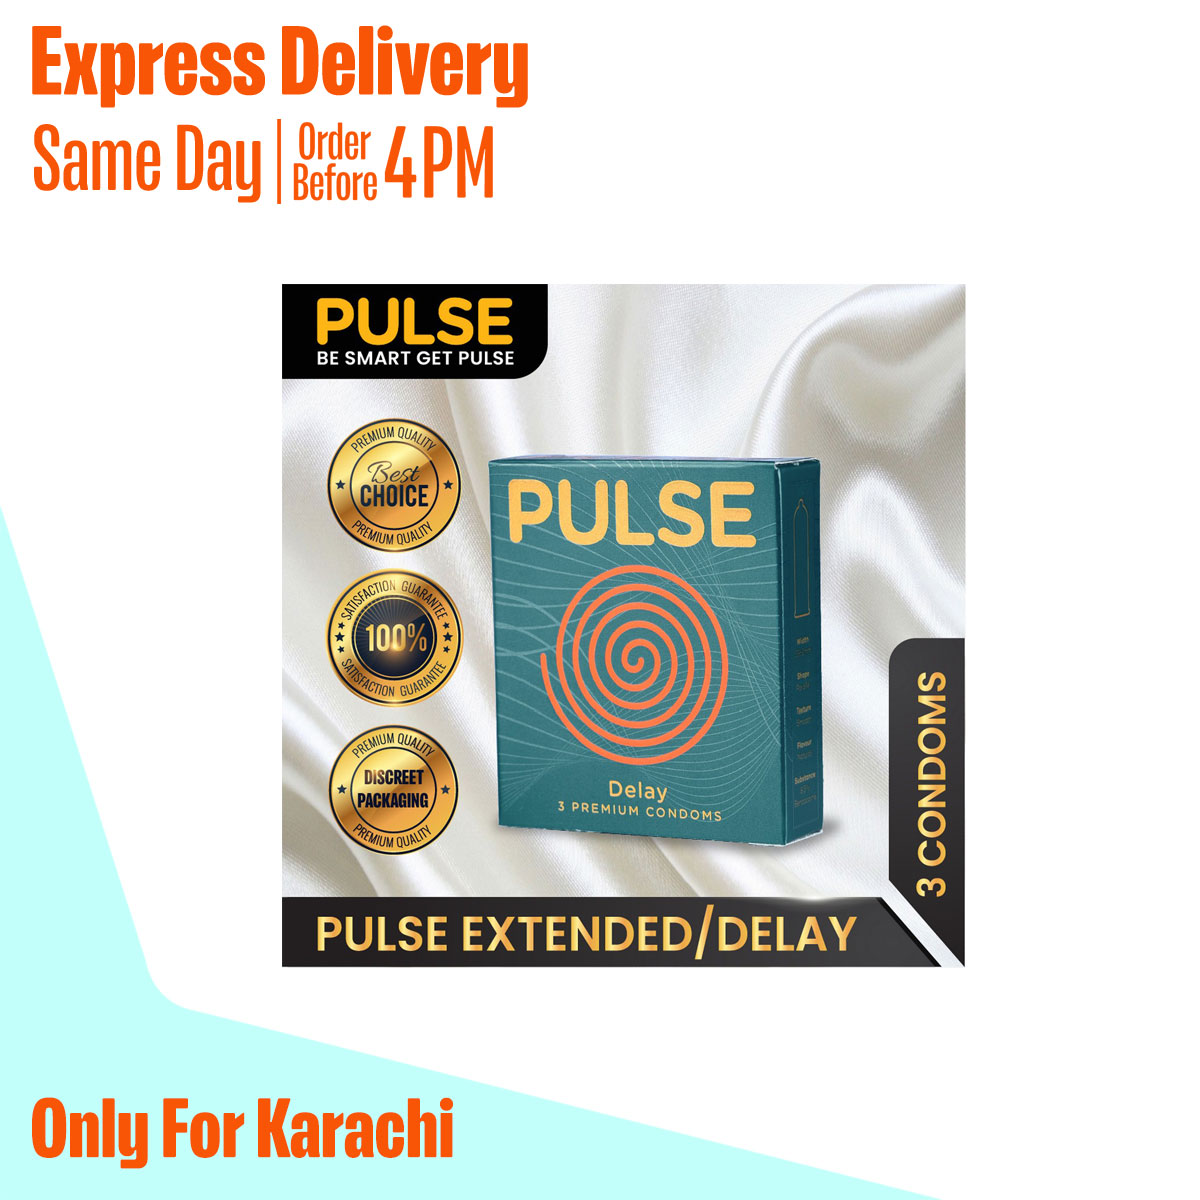 Pulse Extended/d'lay (3 Condoms)